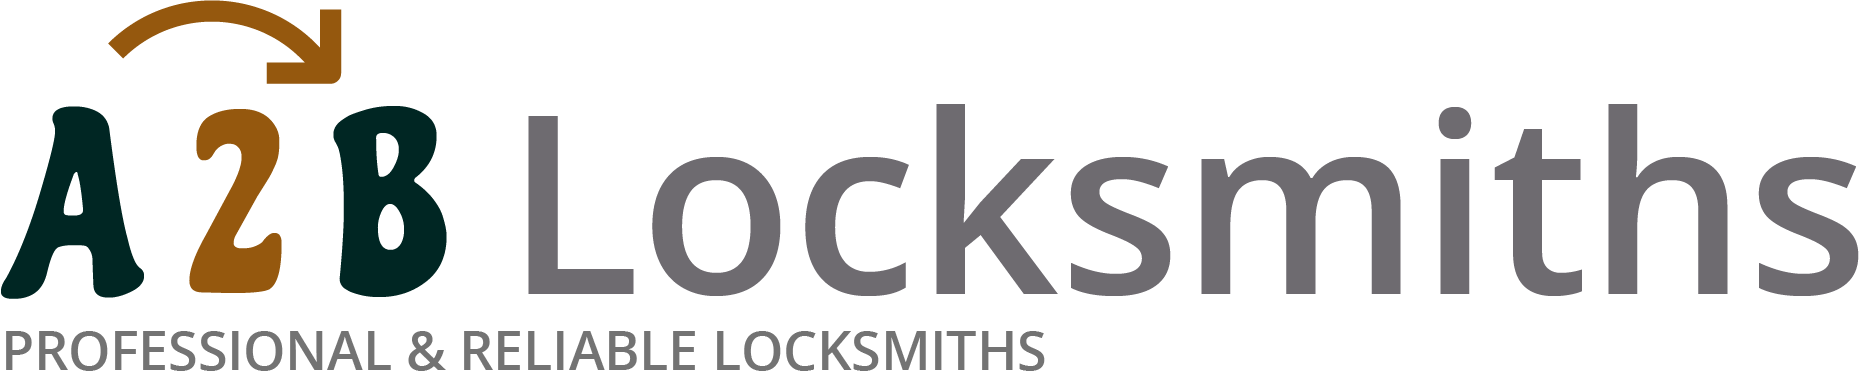 If you are locked out of house in Buckhurst Hill, our 24/7 local emergency locksmith services can help you.